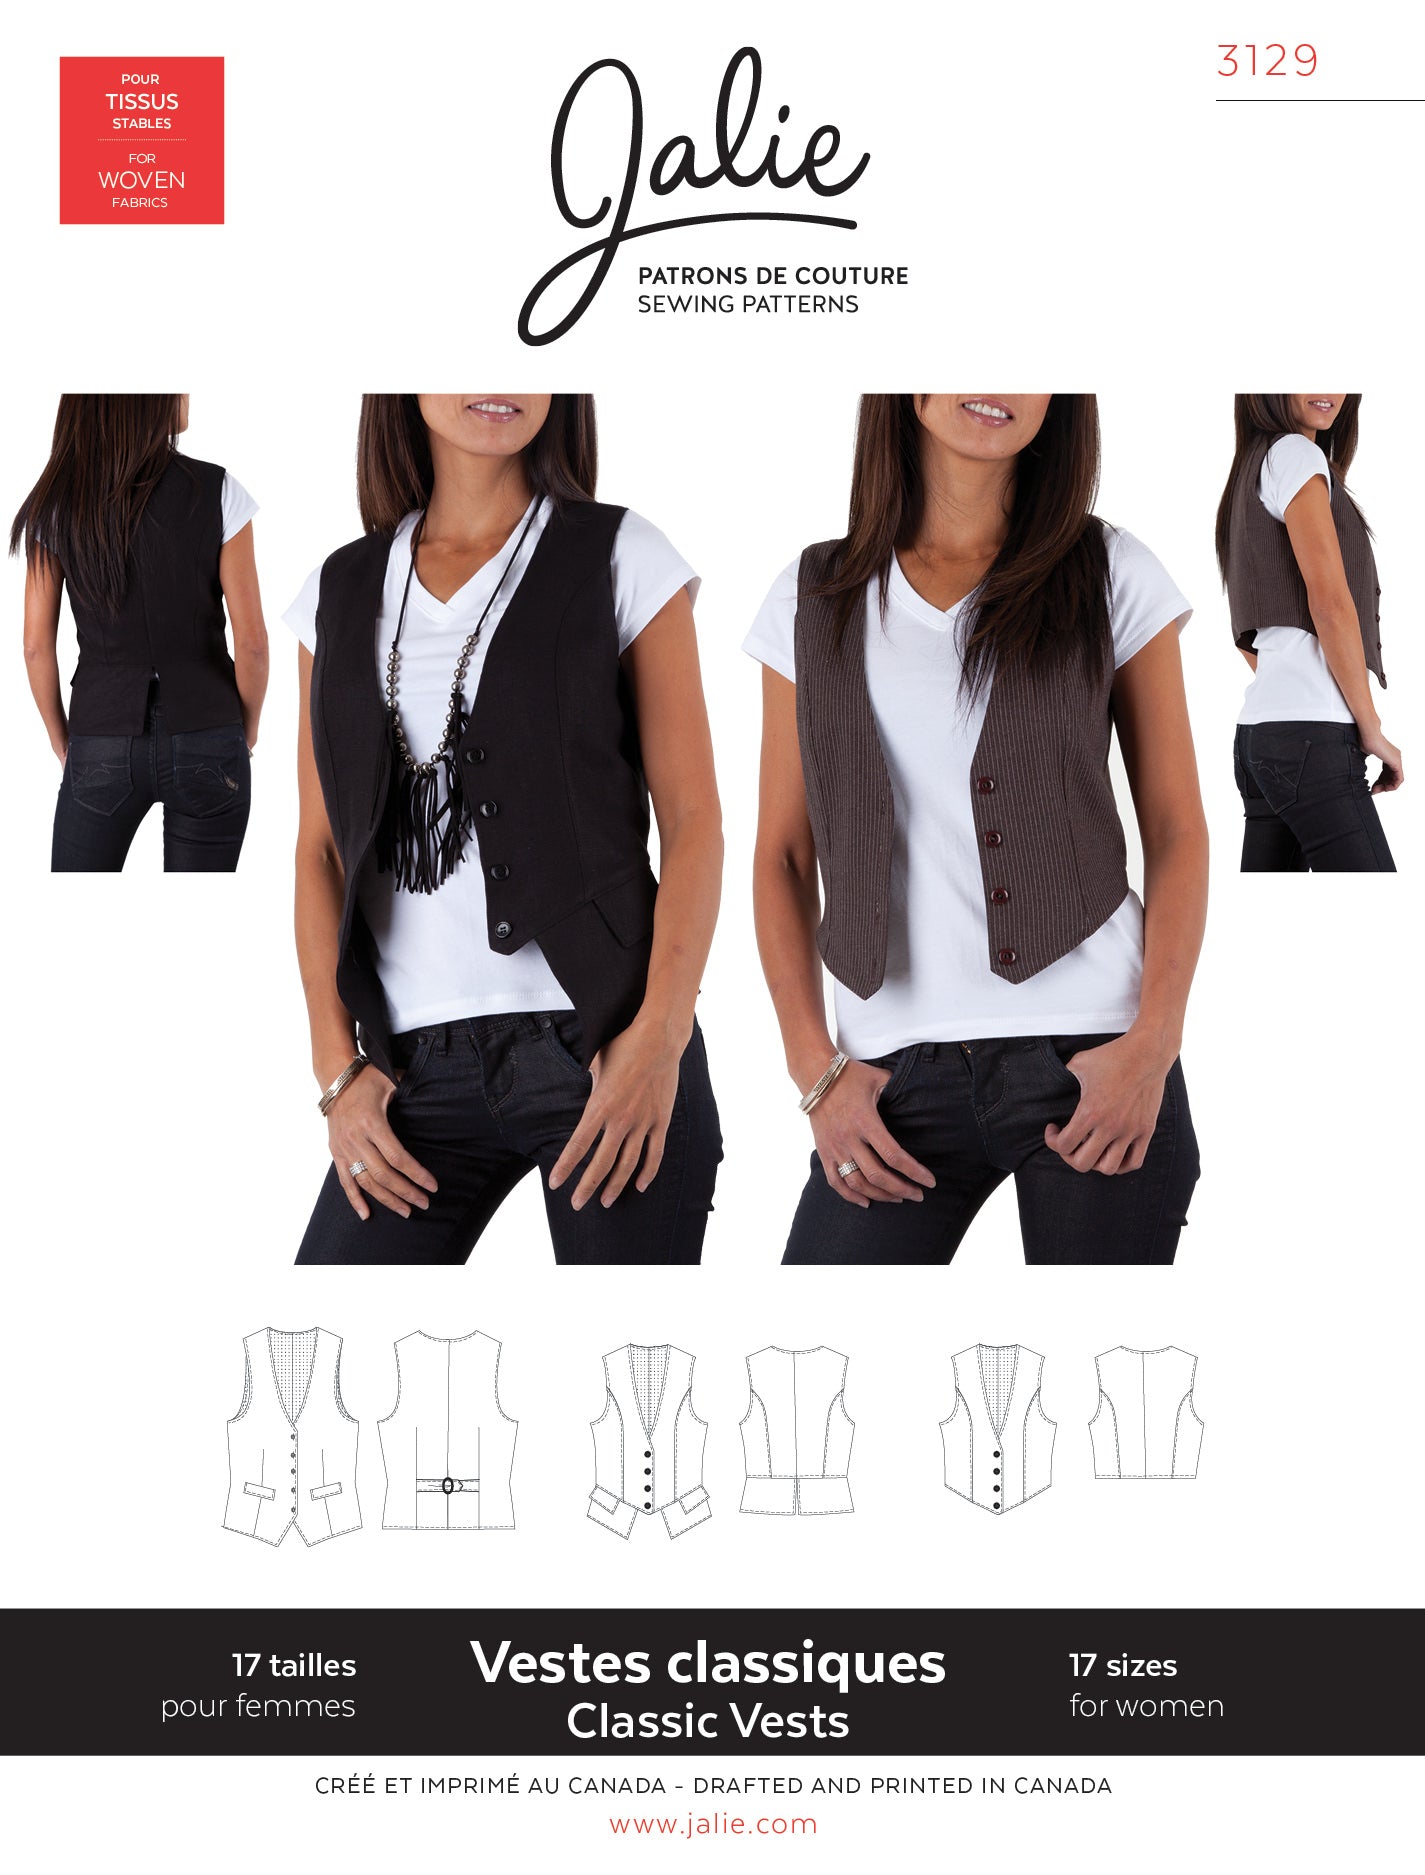 Jalie - Quality sewing patterns for everyone